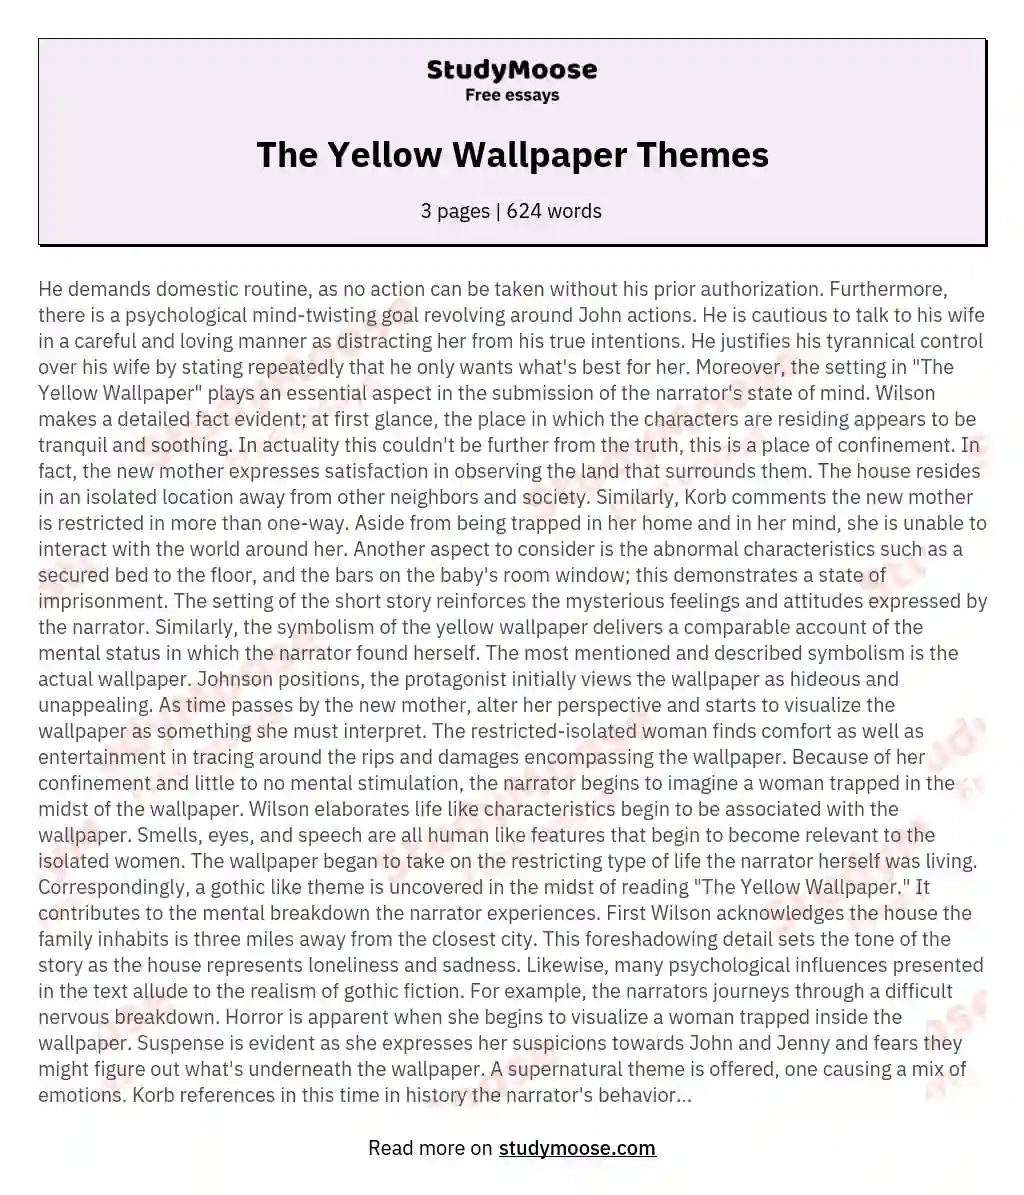 The Yellow Wallpaper Themes essay